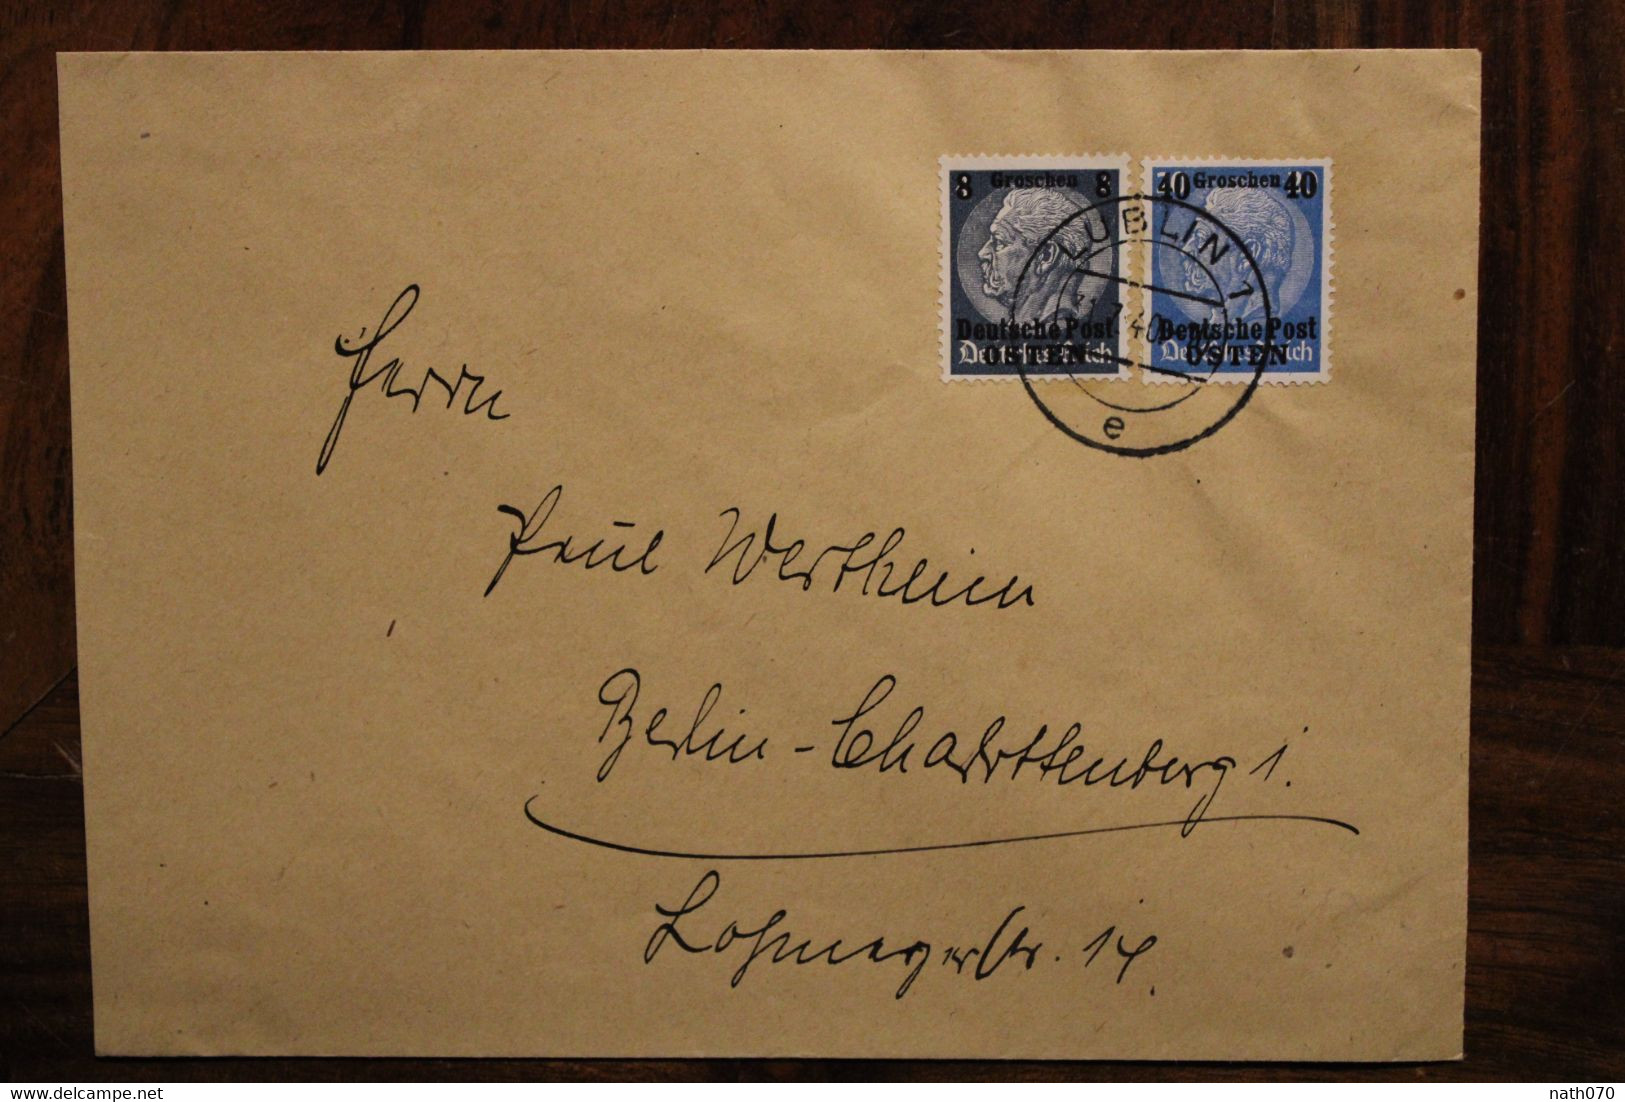 1940 Lublin Osten Dt Reich Allemagne Cover Sudètes WW2 WK2 Besetzung Occupation Poland Pologne - Occupation 1938-45